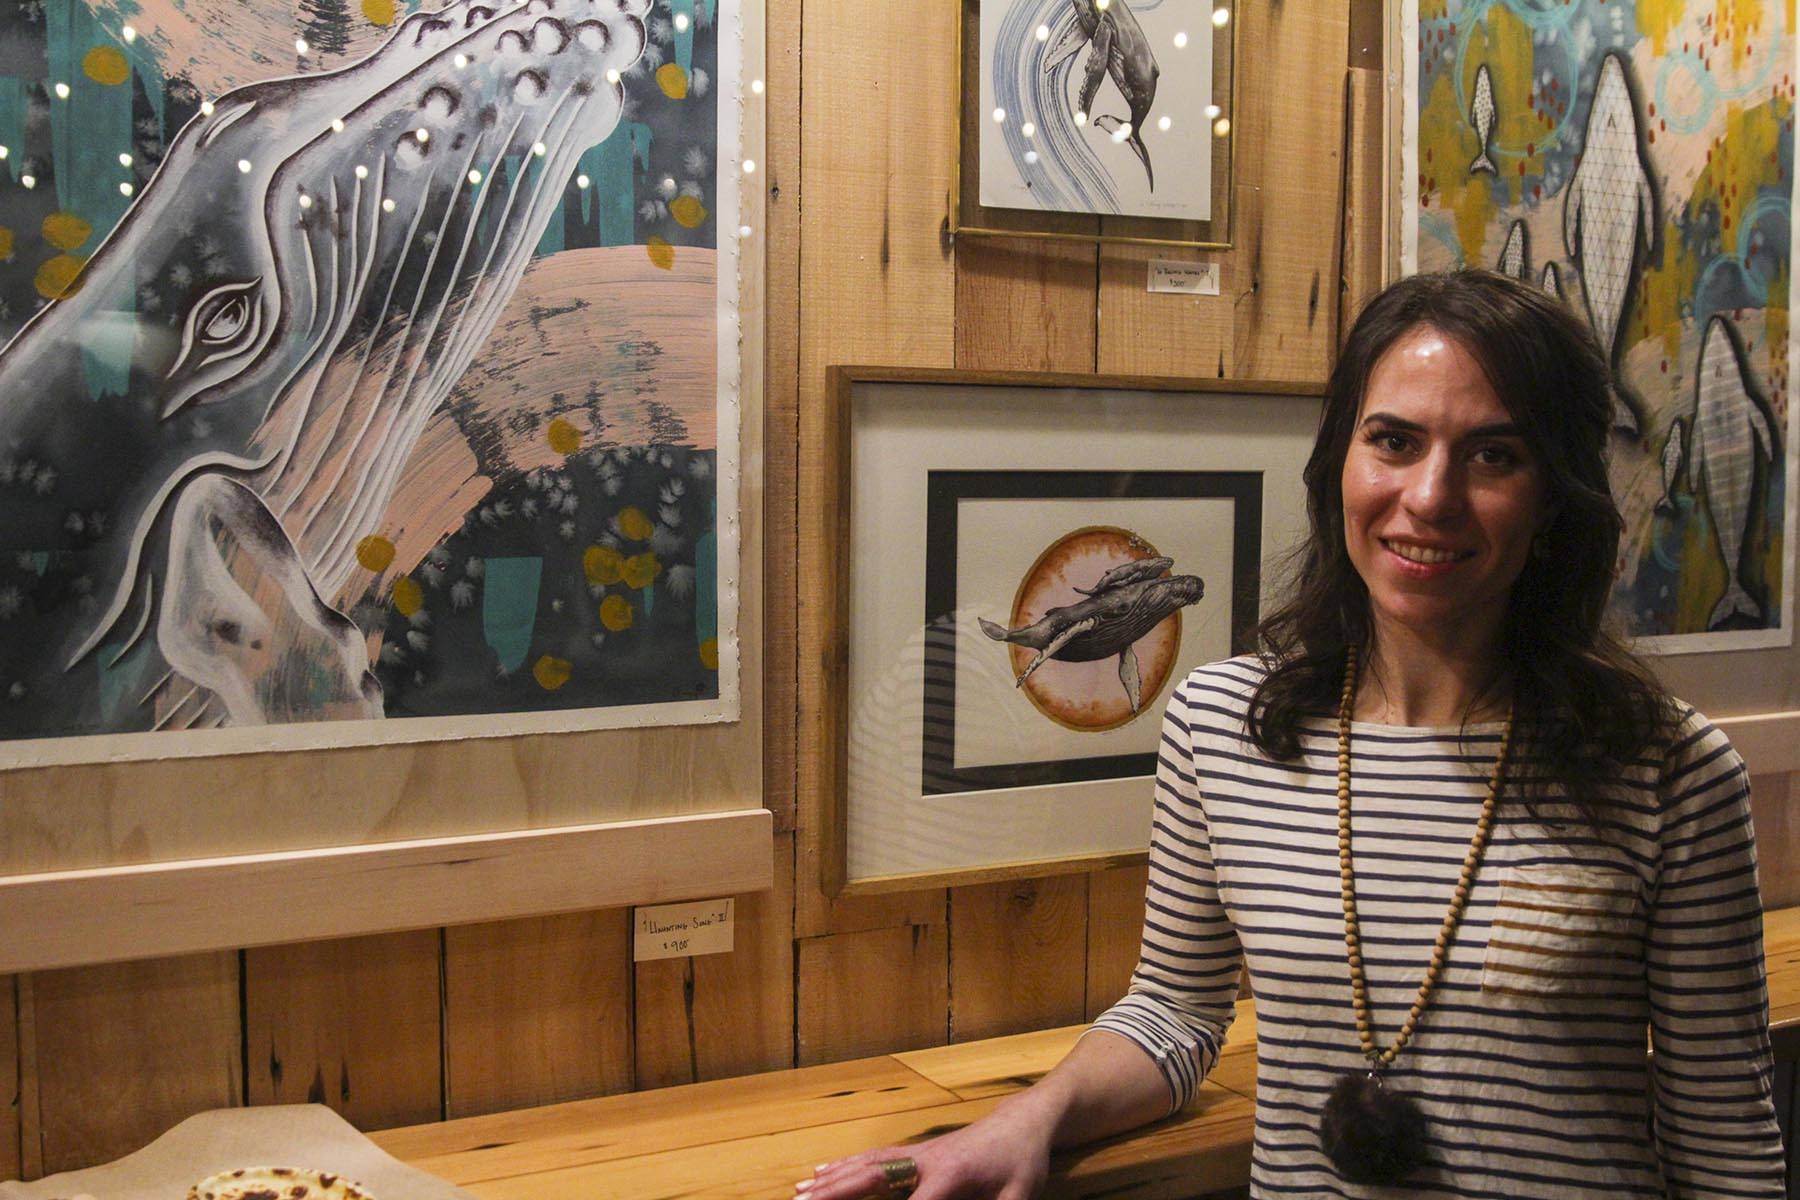 Jacqueline Tingey, a local artist, poses with some of her art at Devil’s Club Brewery during First Friday, March 6, 2020. (Michael S. Lockett | Juneau Empire)